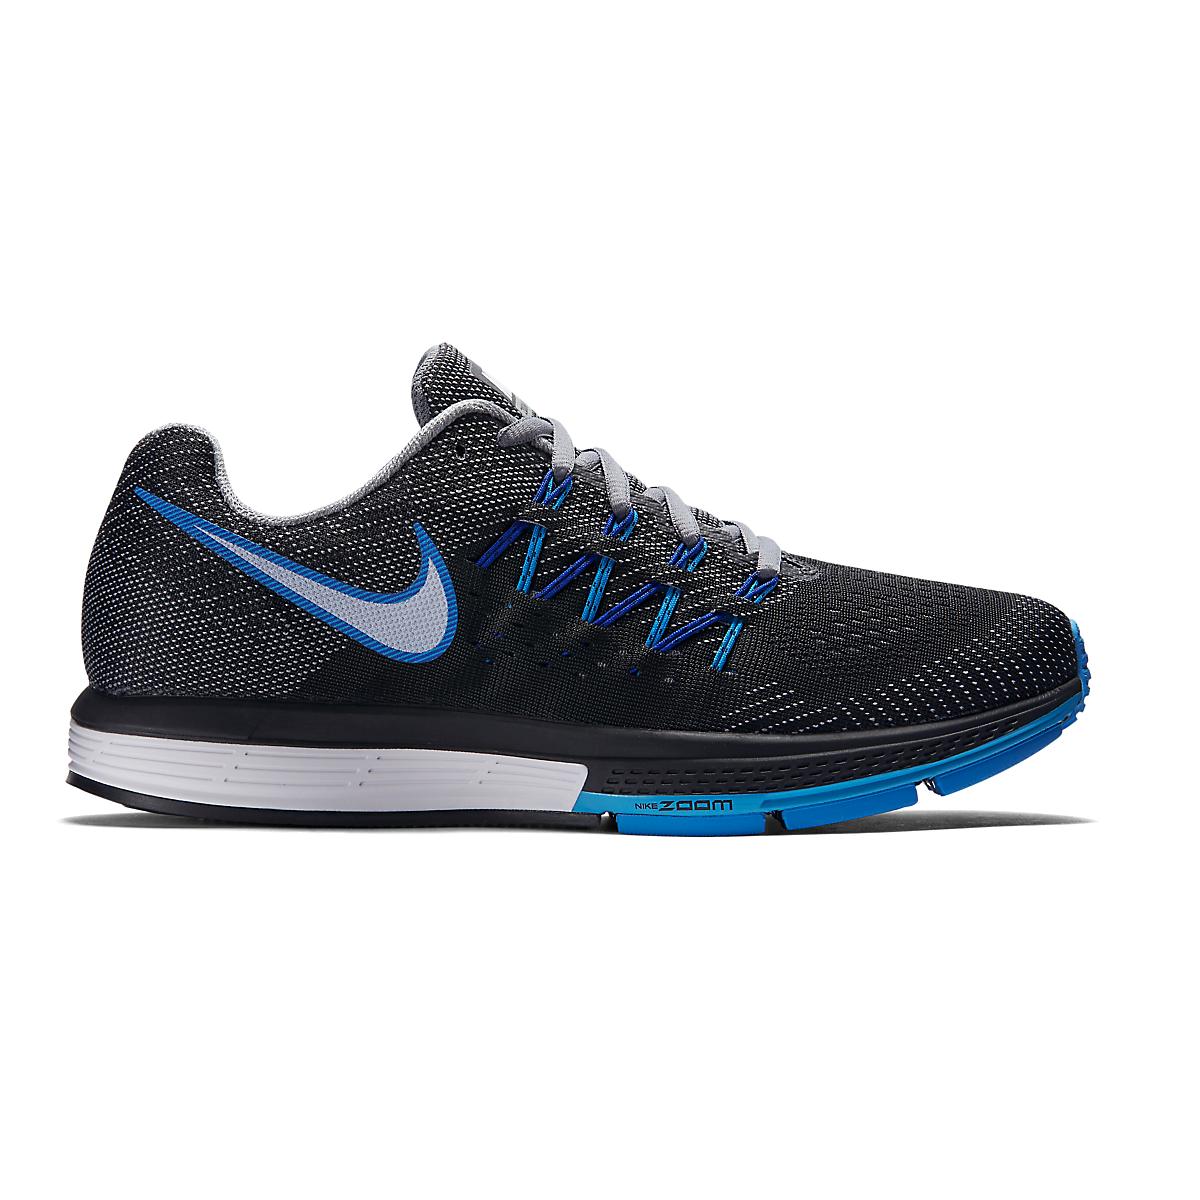 Men's Nike Air Zoom Vomero-10 at Road Runner Sports